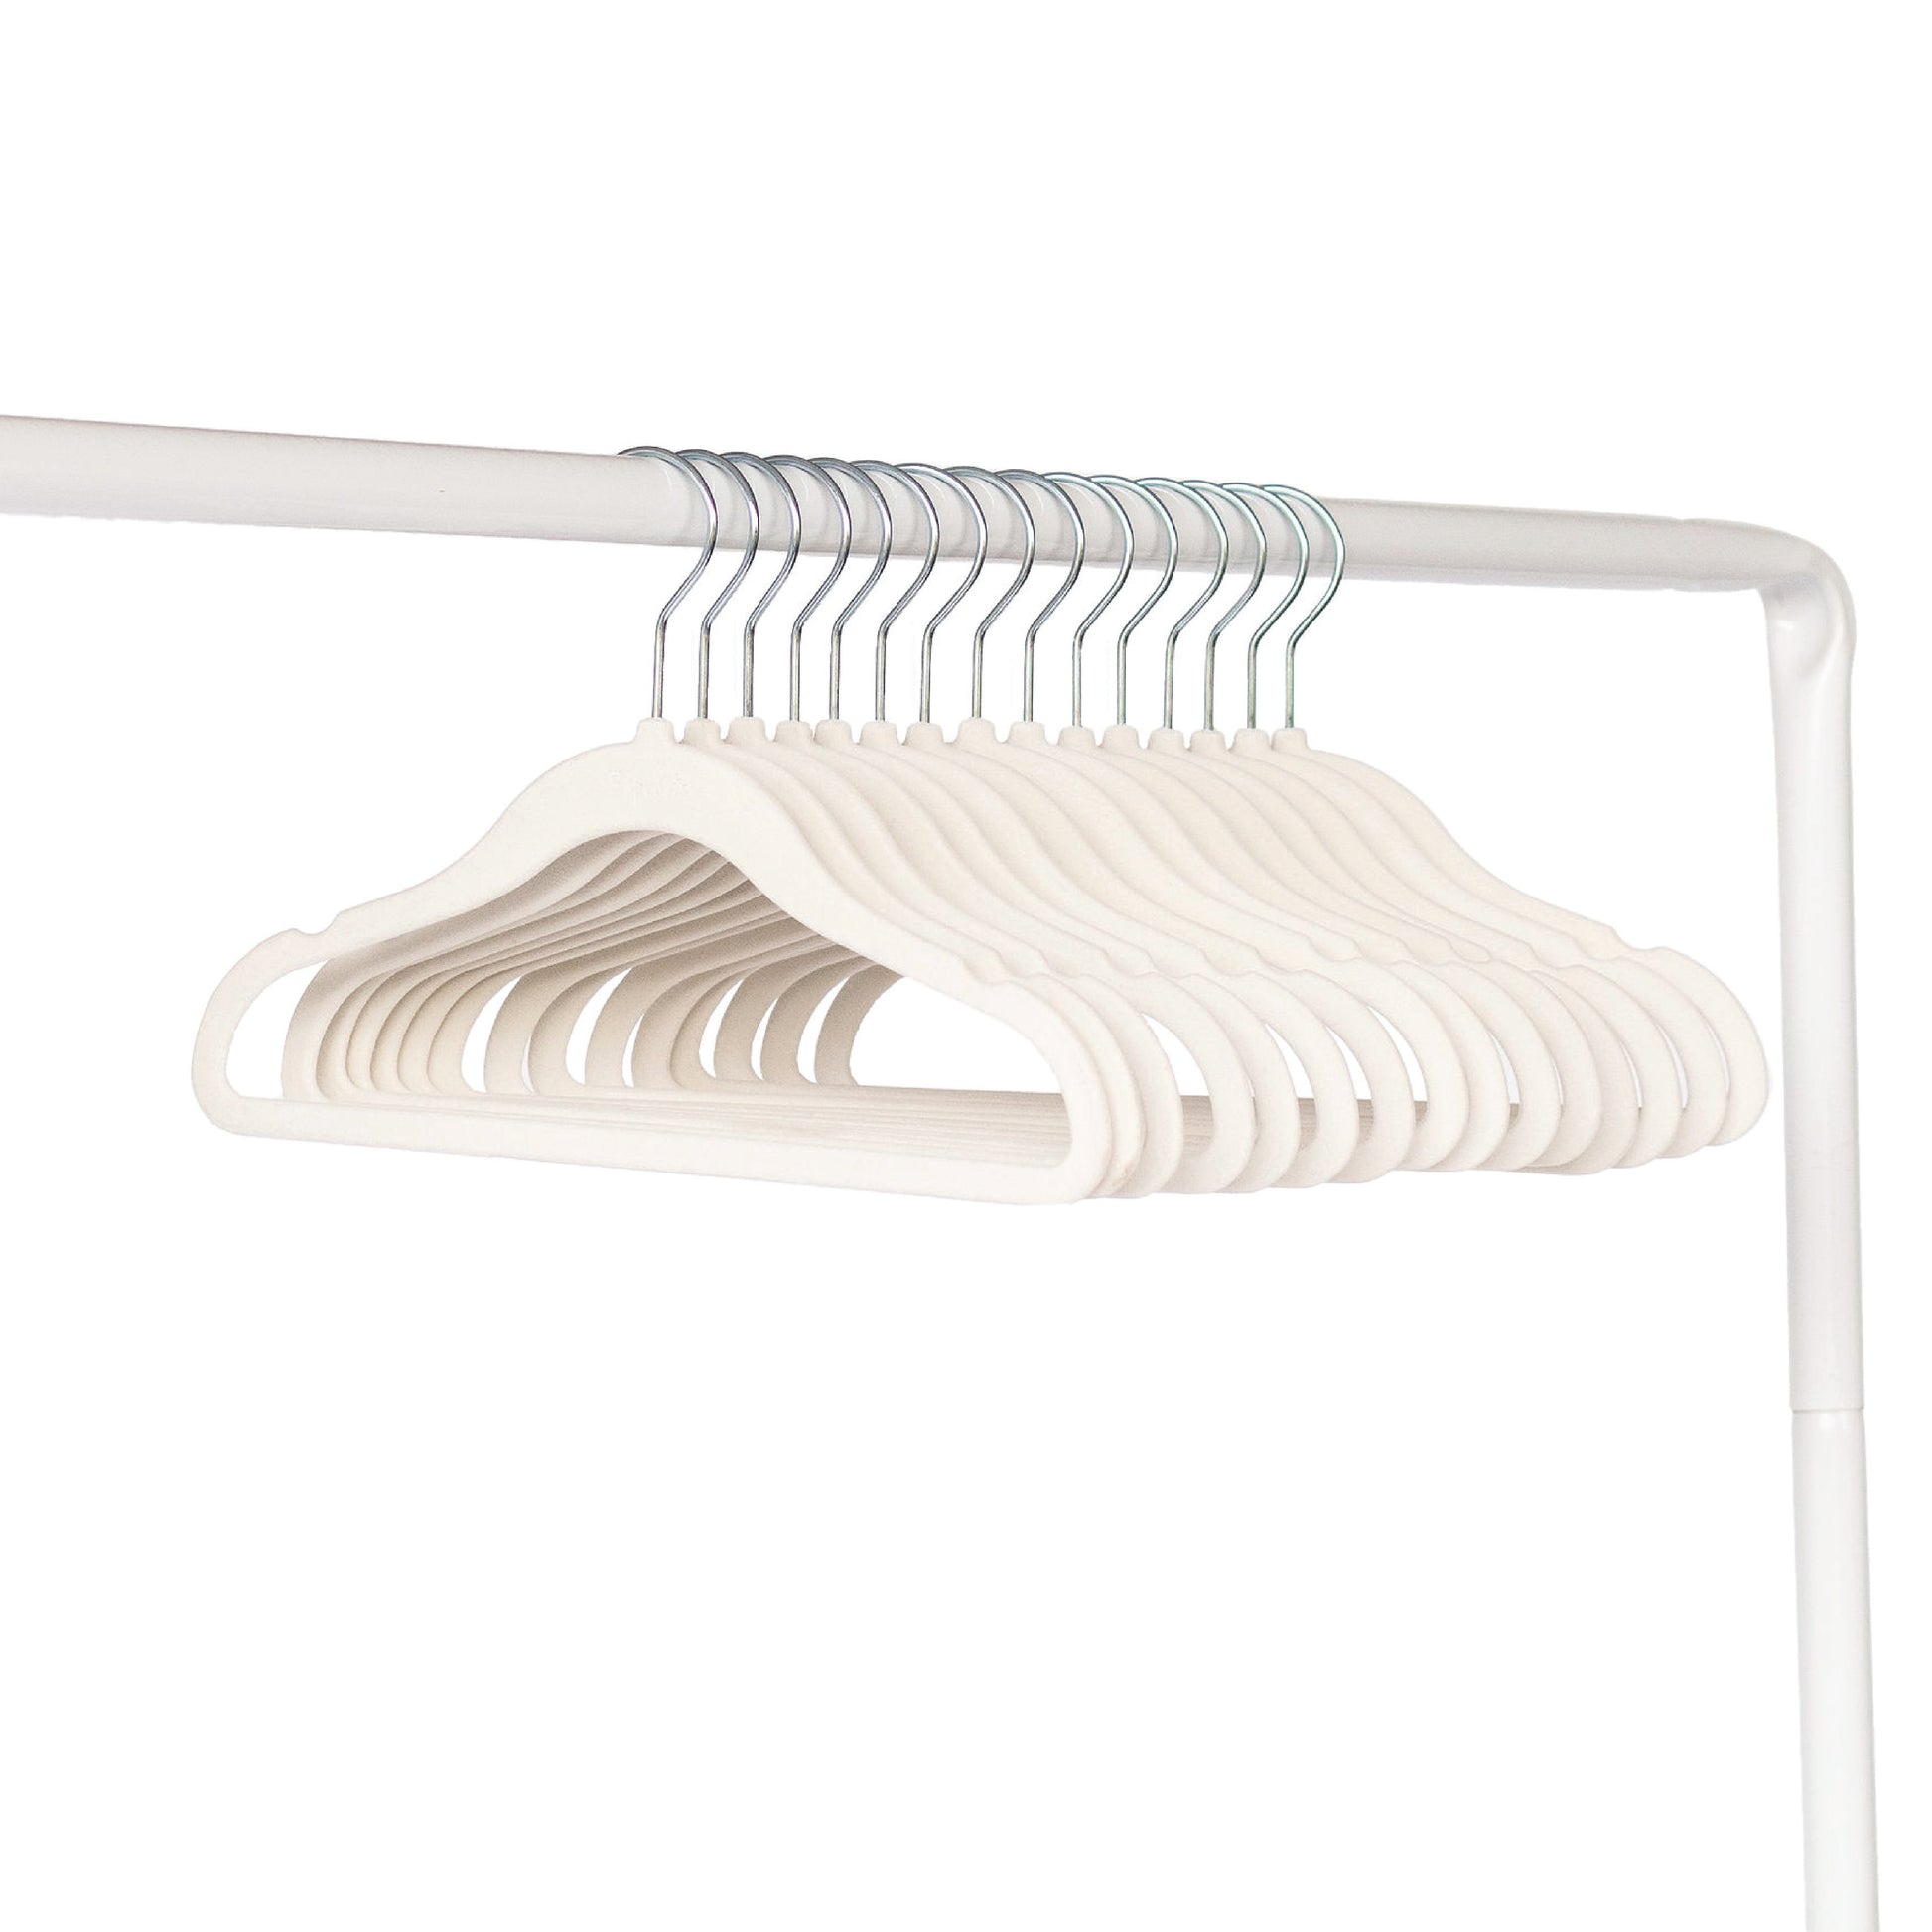 3 Sprouts Baby Velvet, Non-Slip Clothes Hangers - Pack of 30 - Seafoam